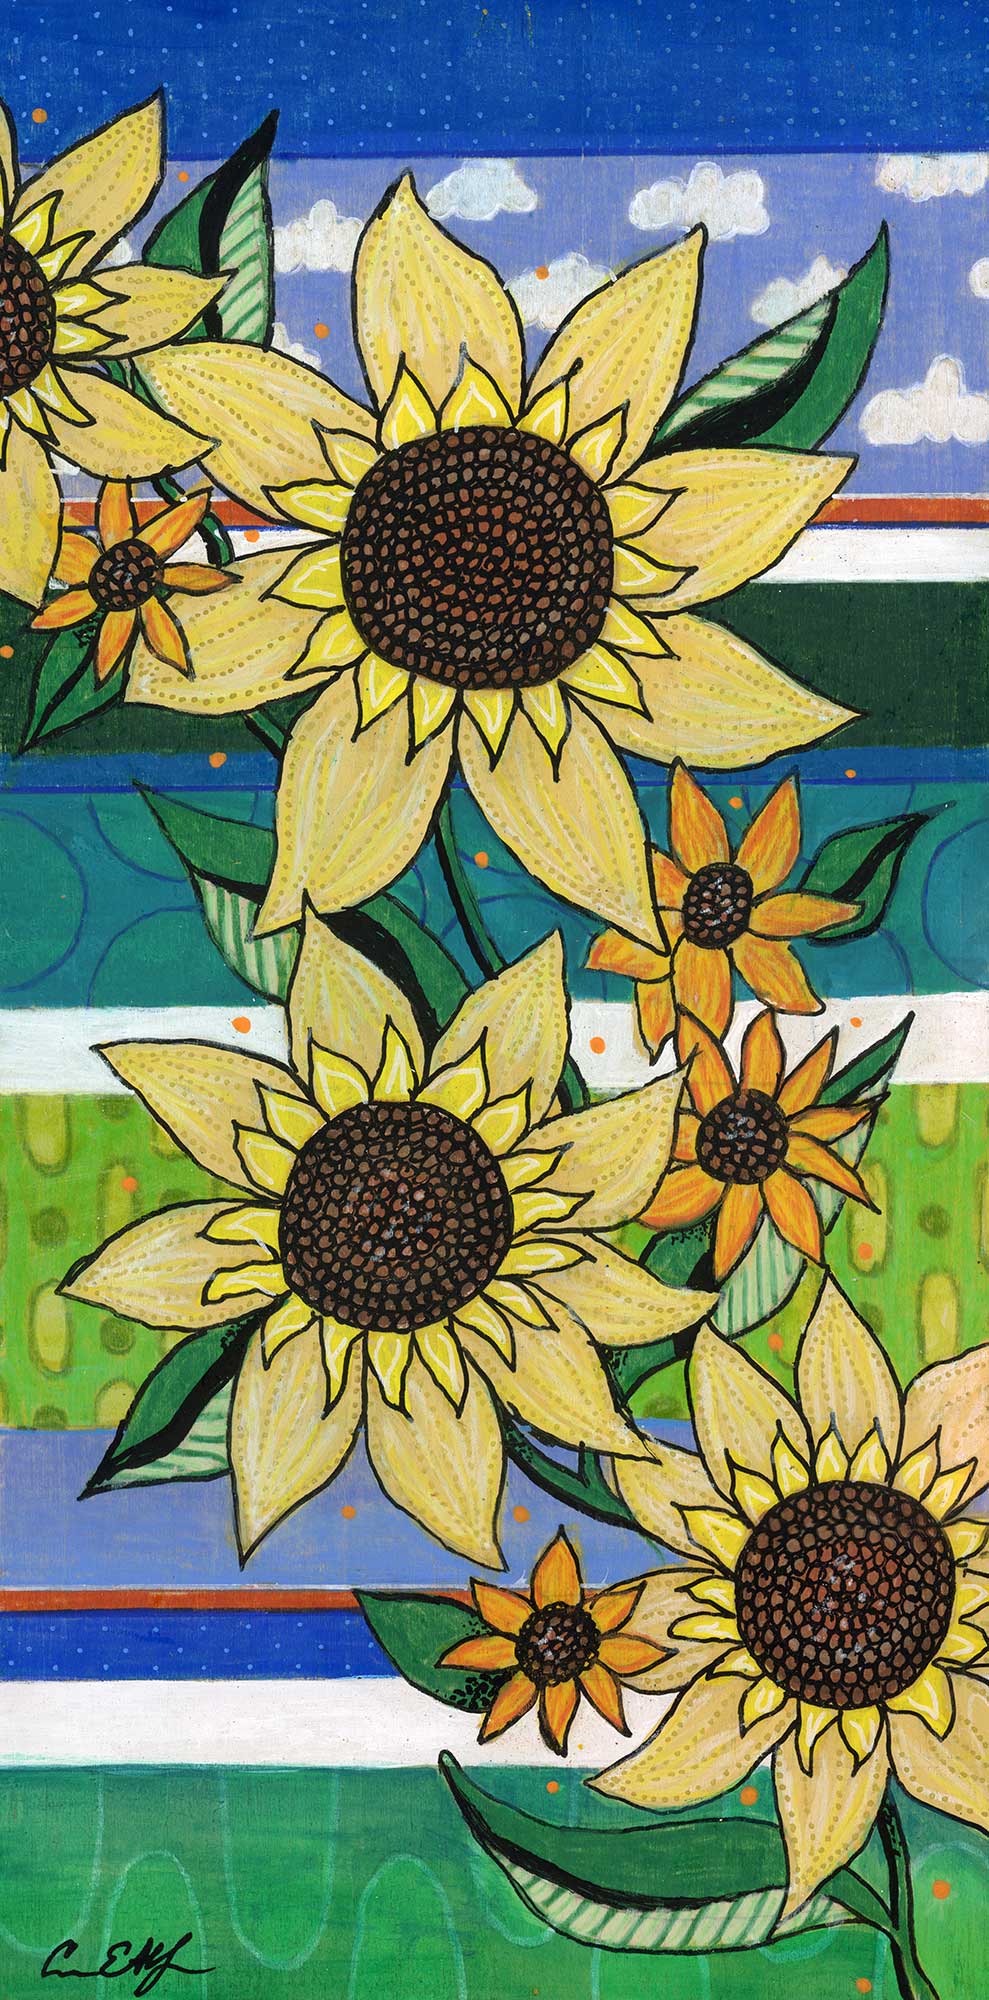 SOLD - Sunflowers, 6" x 12", mixed media